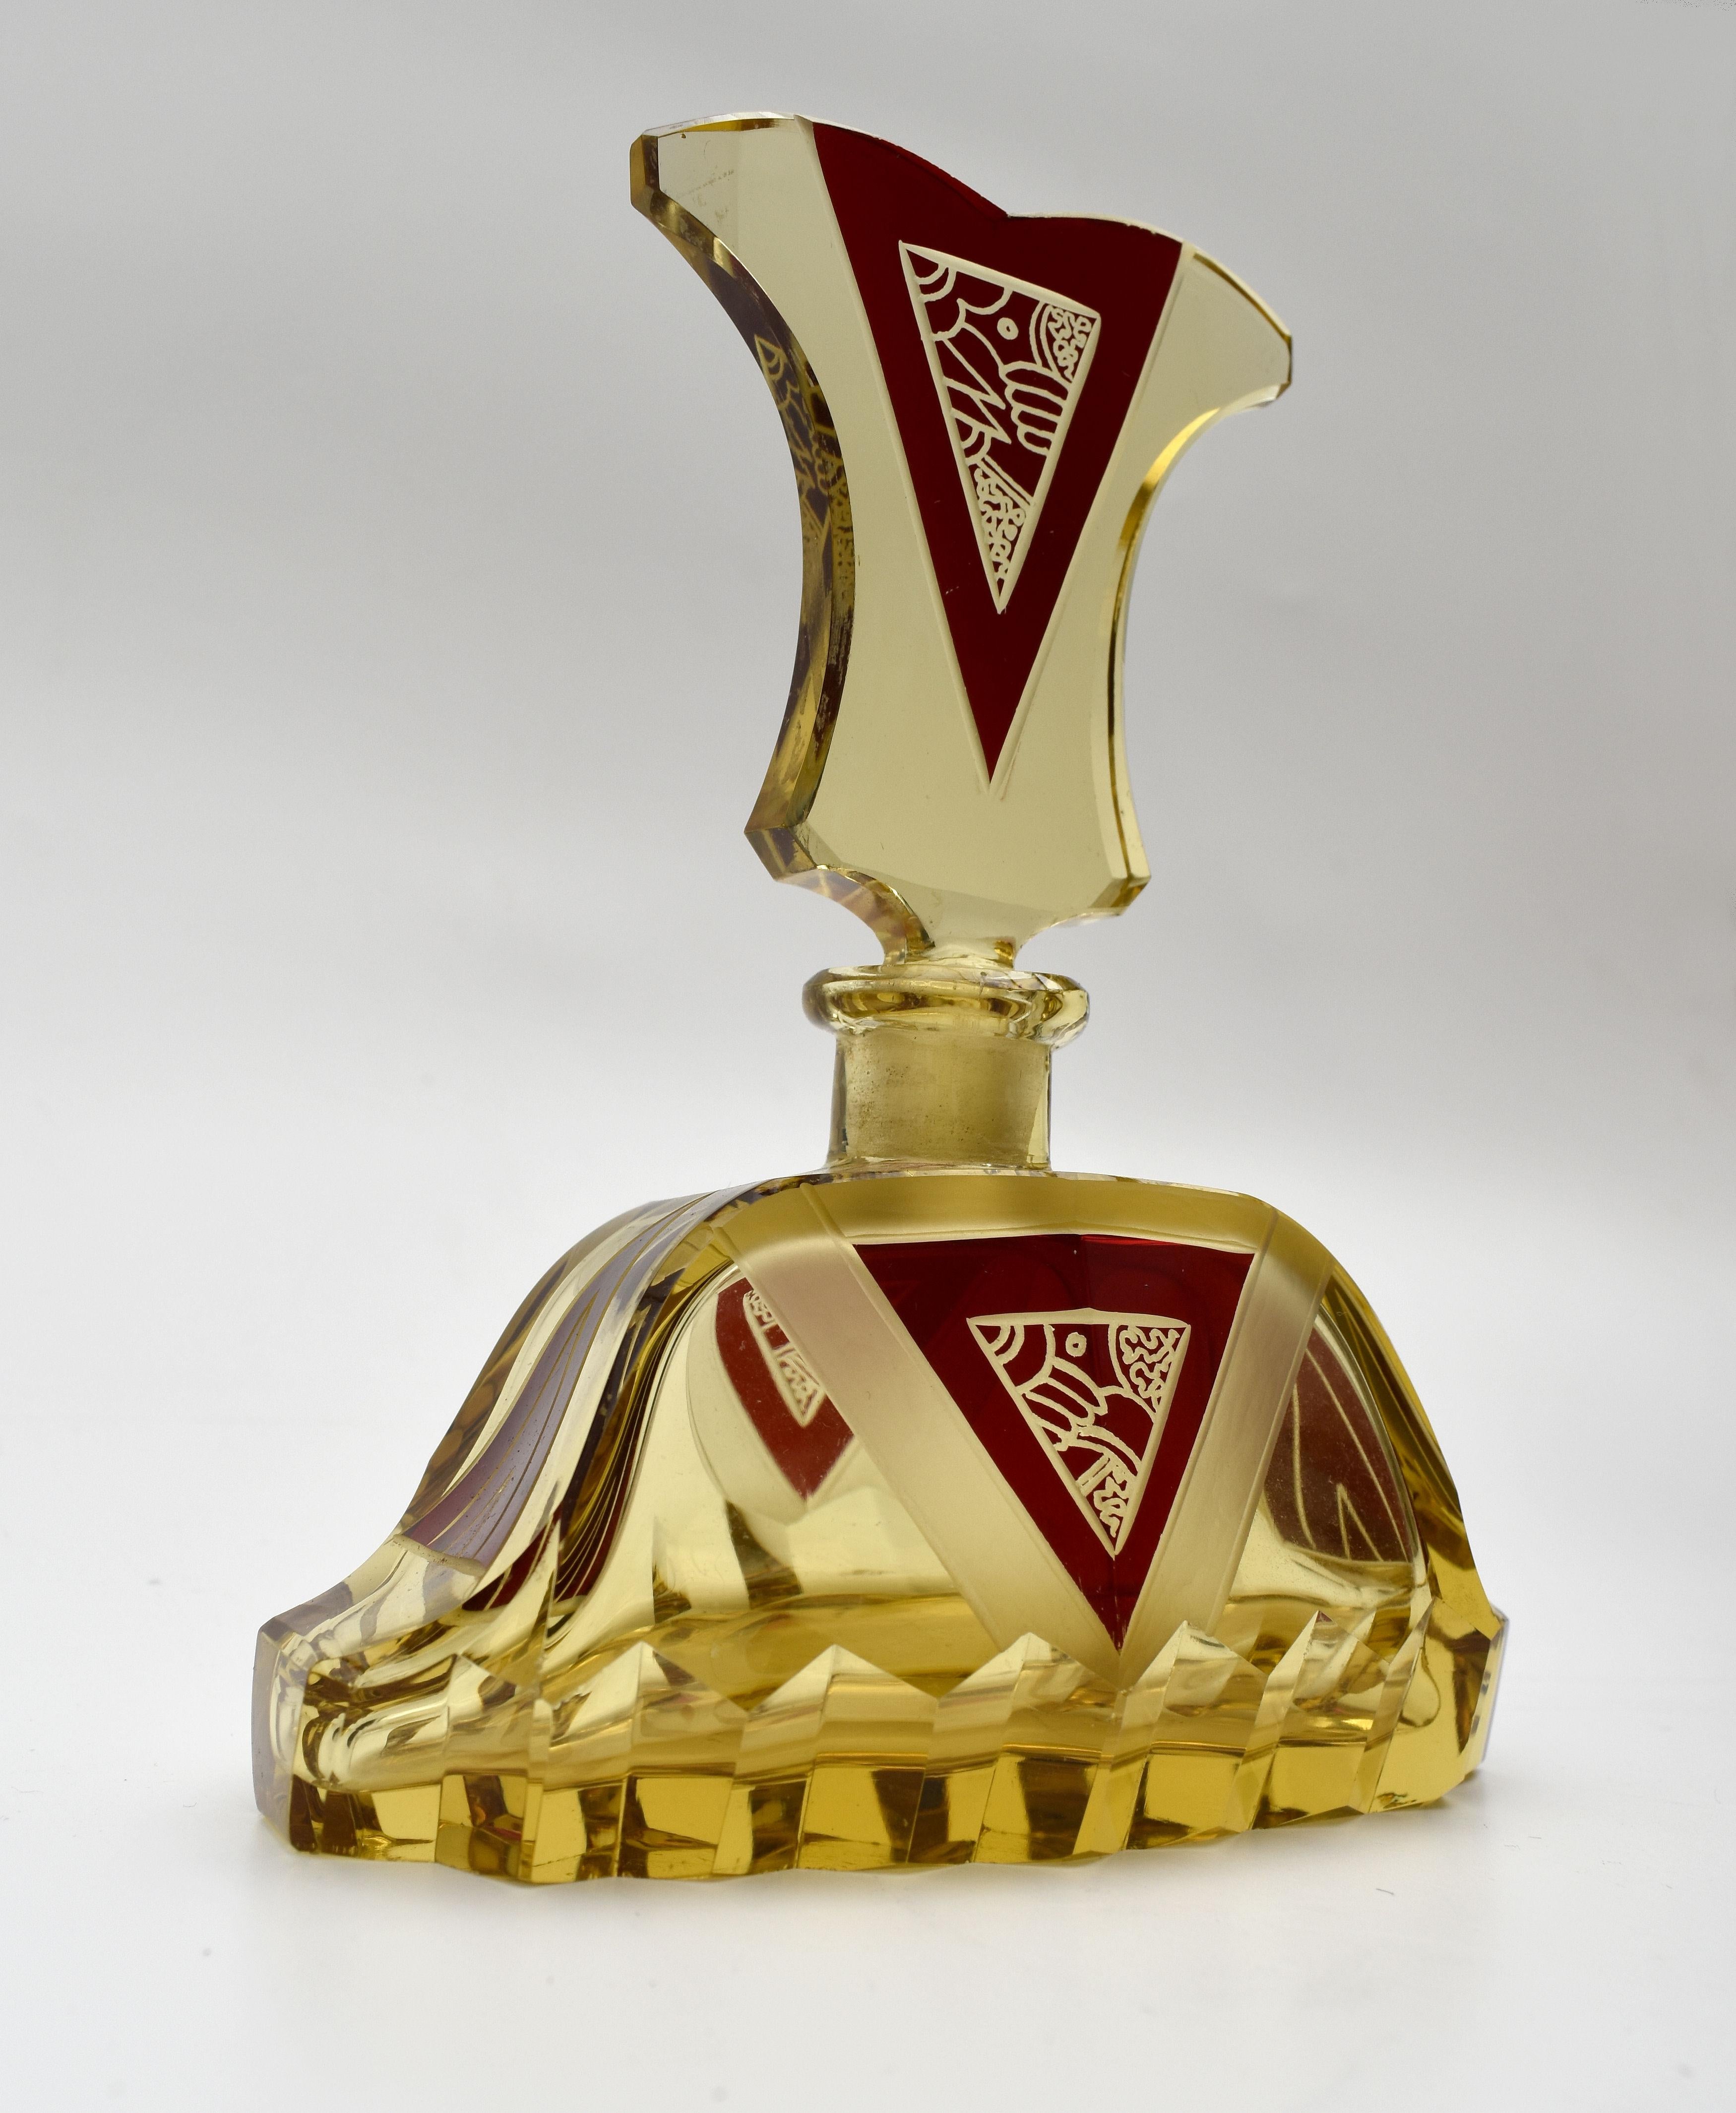 Art Deco Amber Coloured Glass Perfume Bottle by Karl Palda, c1930s For Sale 3